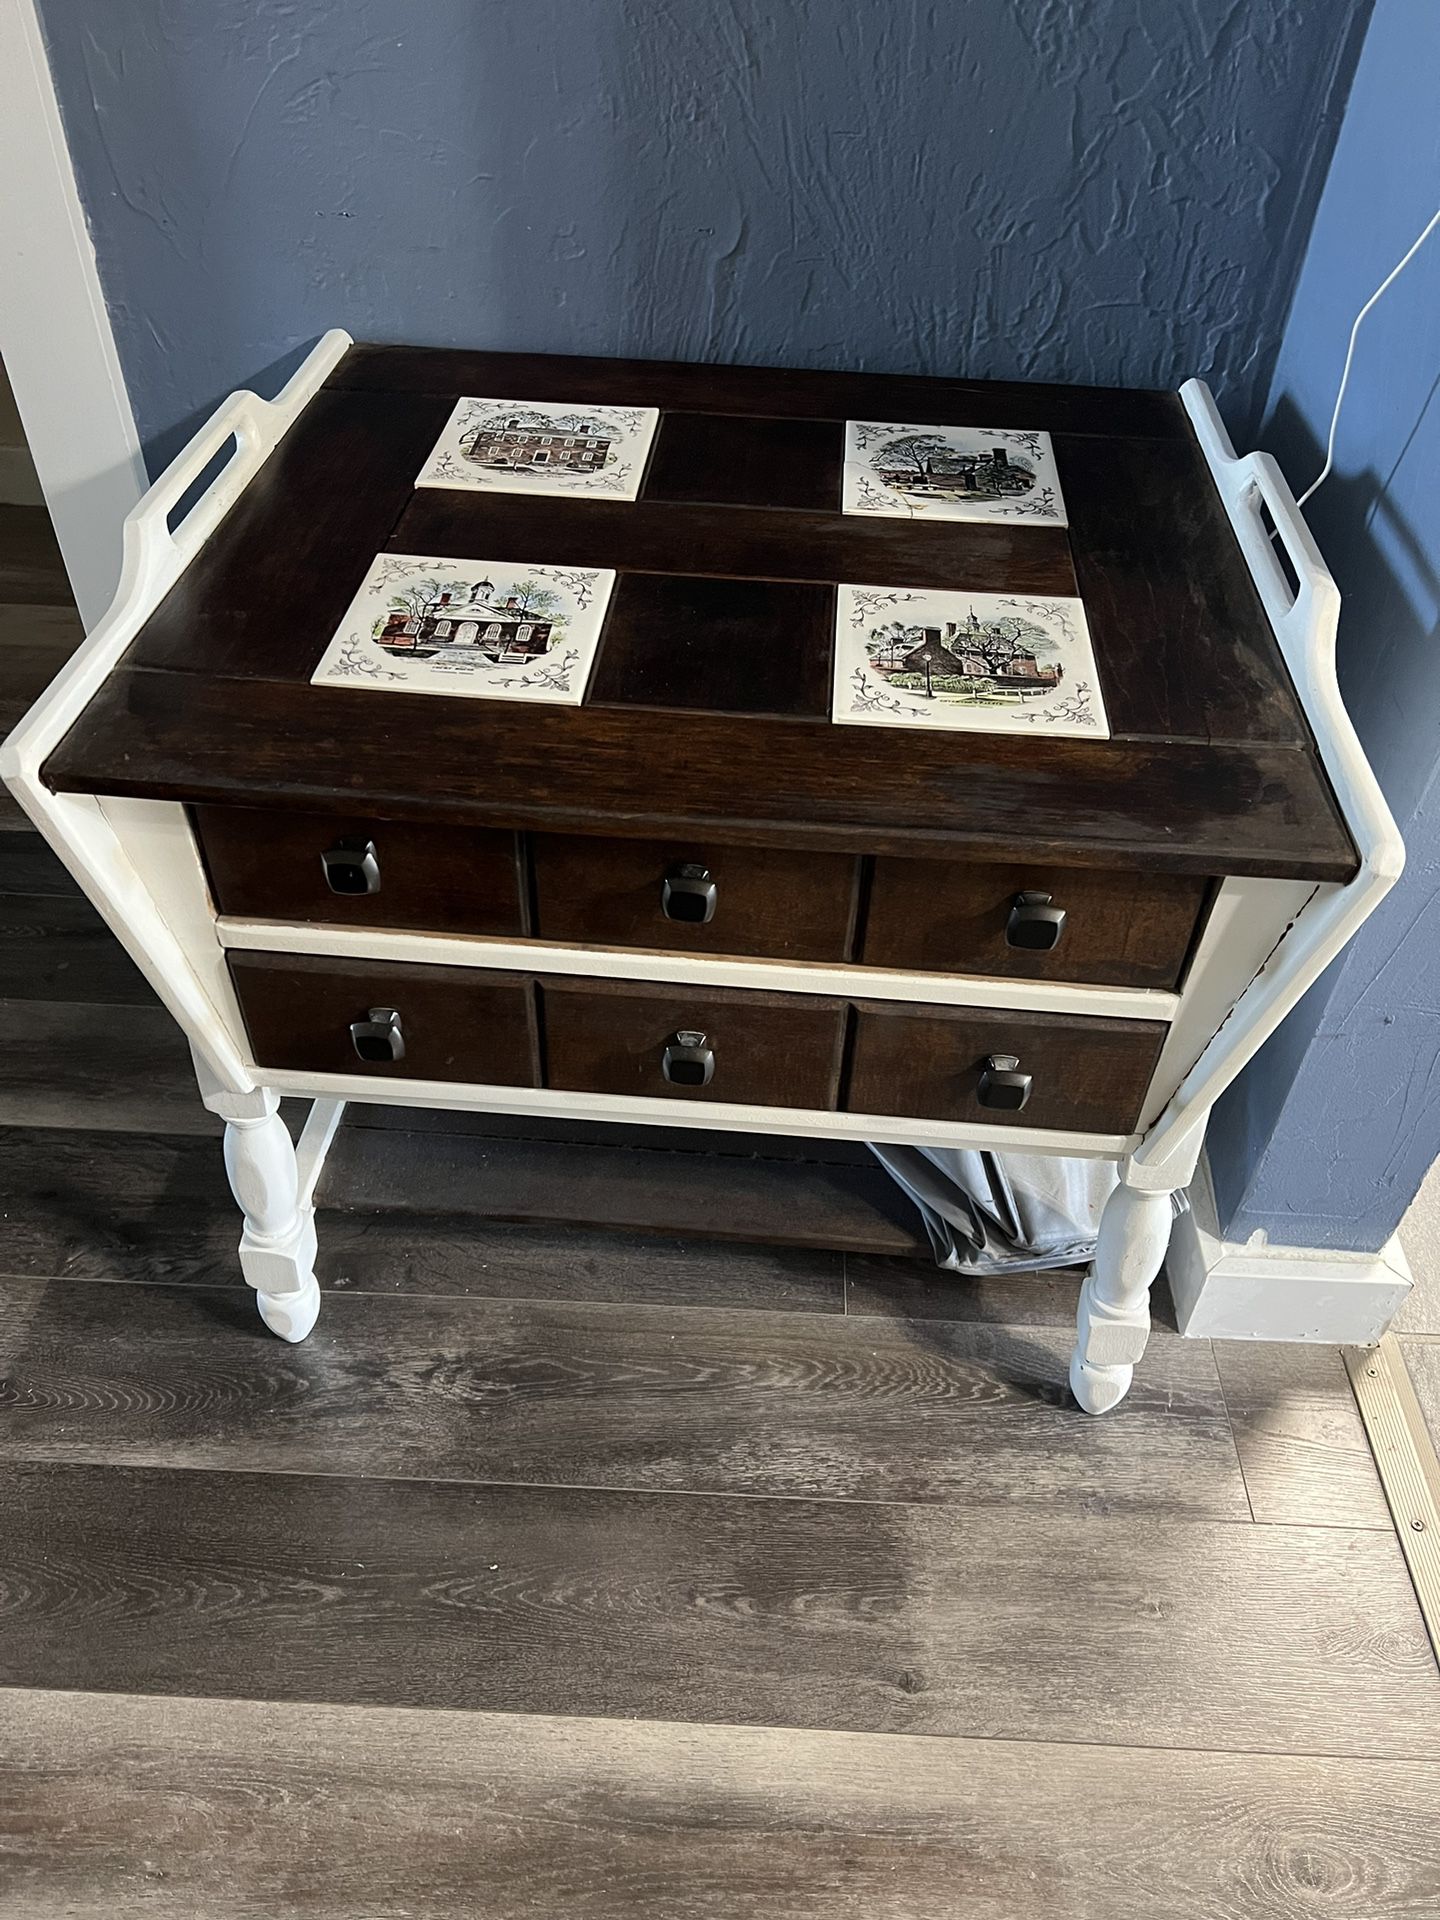 Small Table W/ 2 Drawers And Bottom Storage Shelf